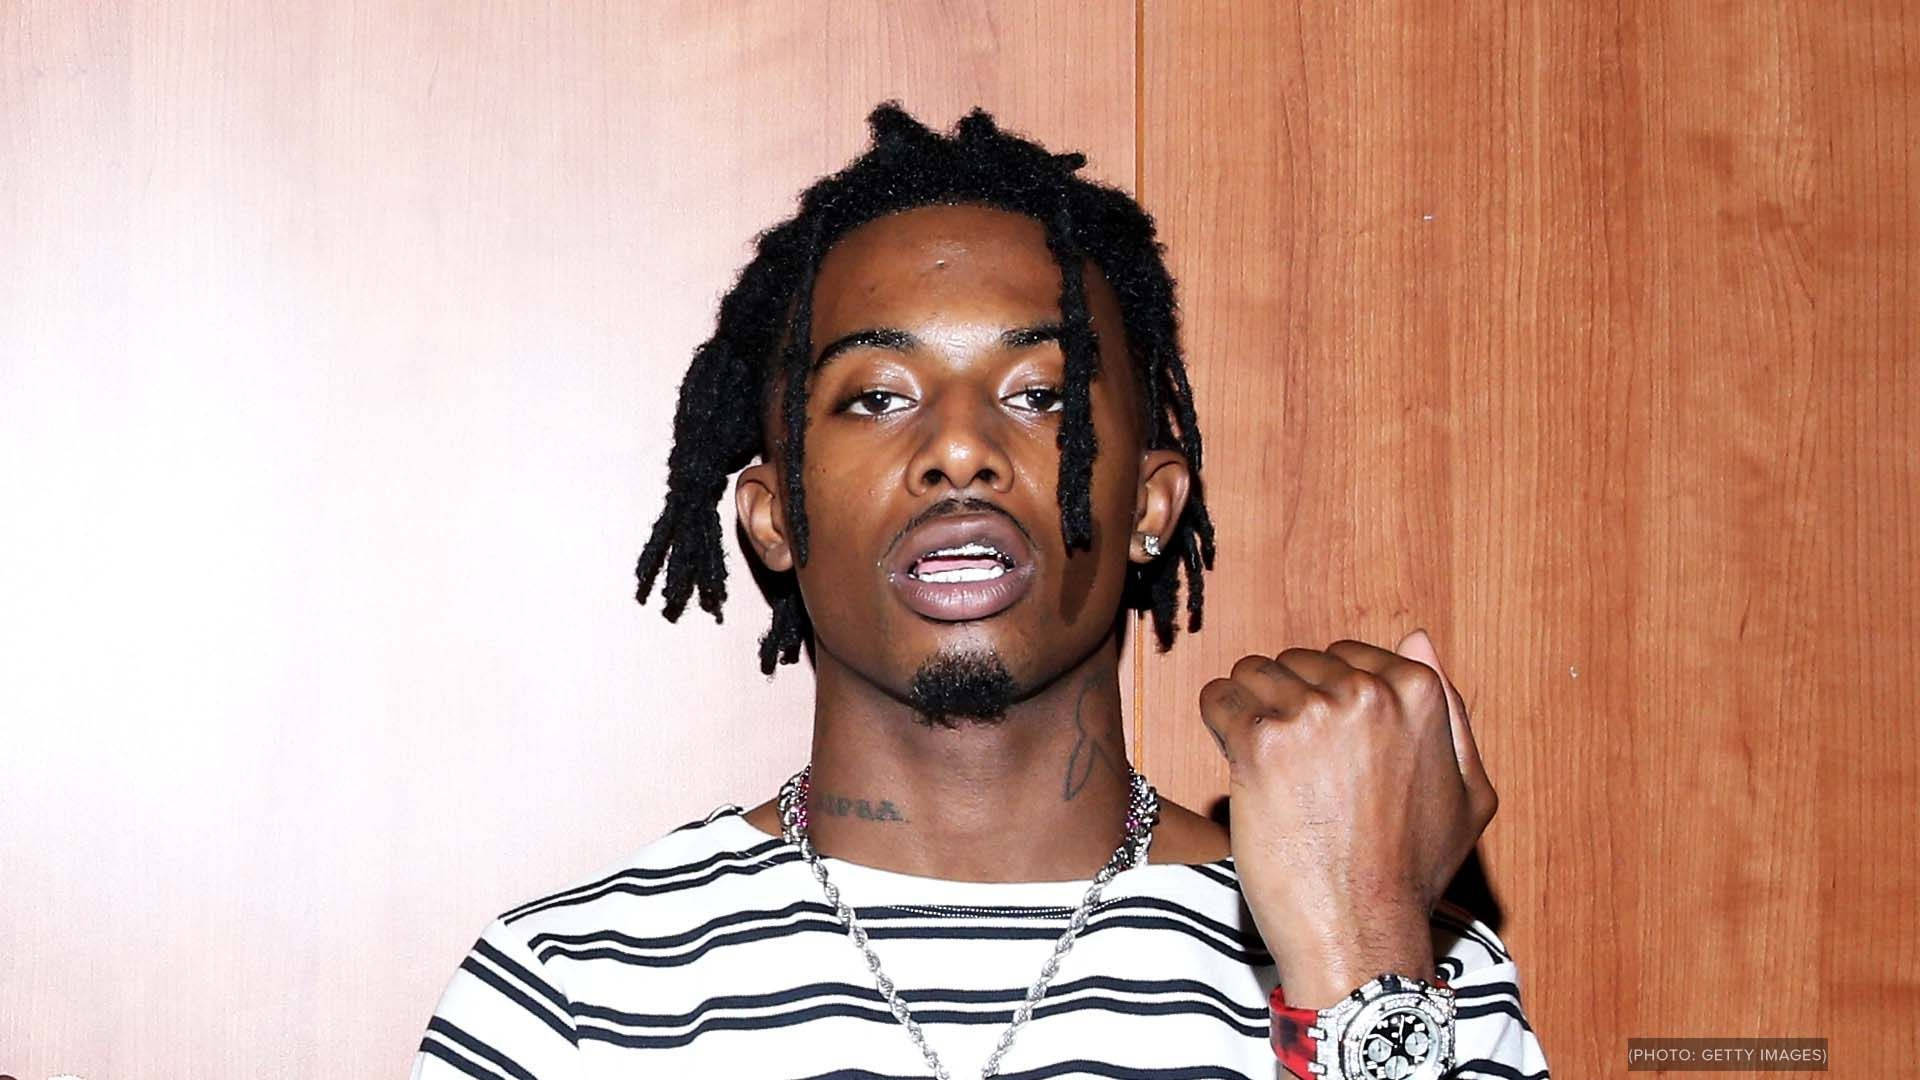 Playboi Carti Holds Fist Up In Adrenaline And Progress. Background